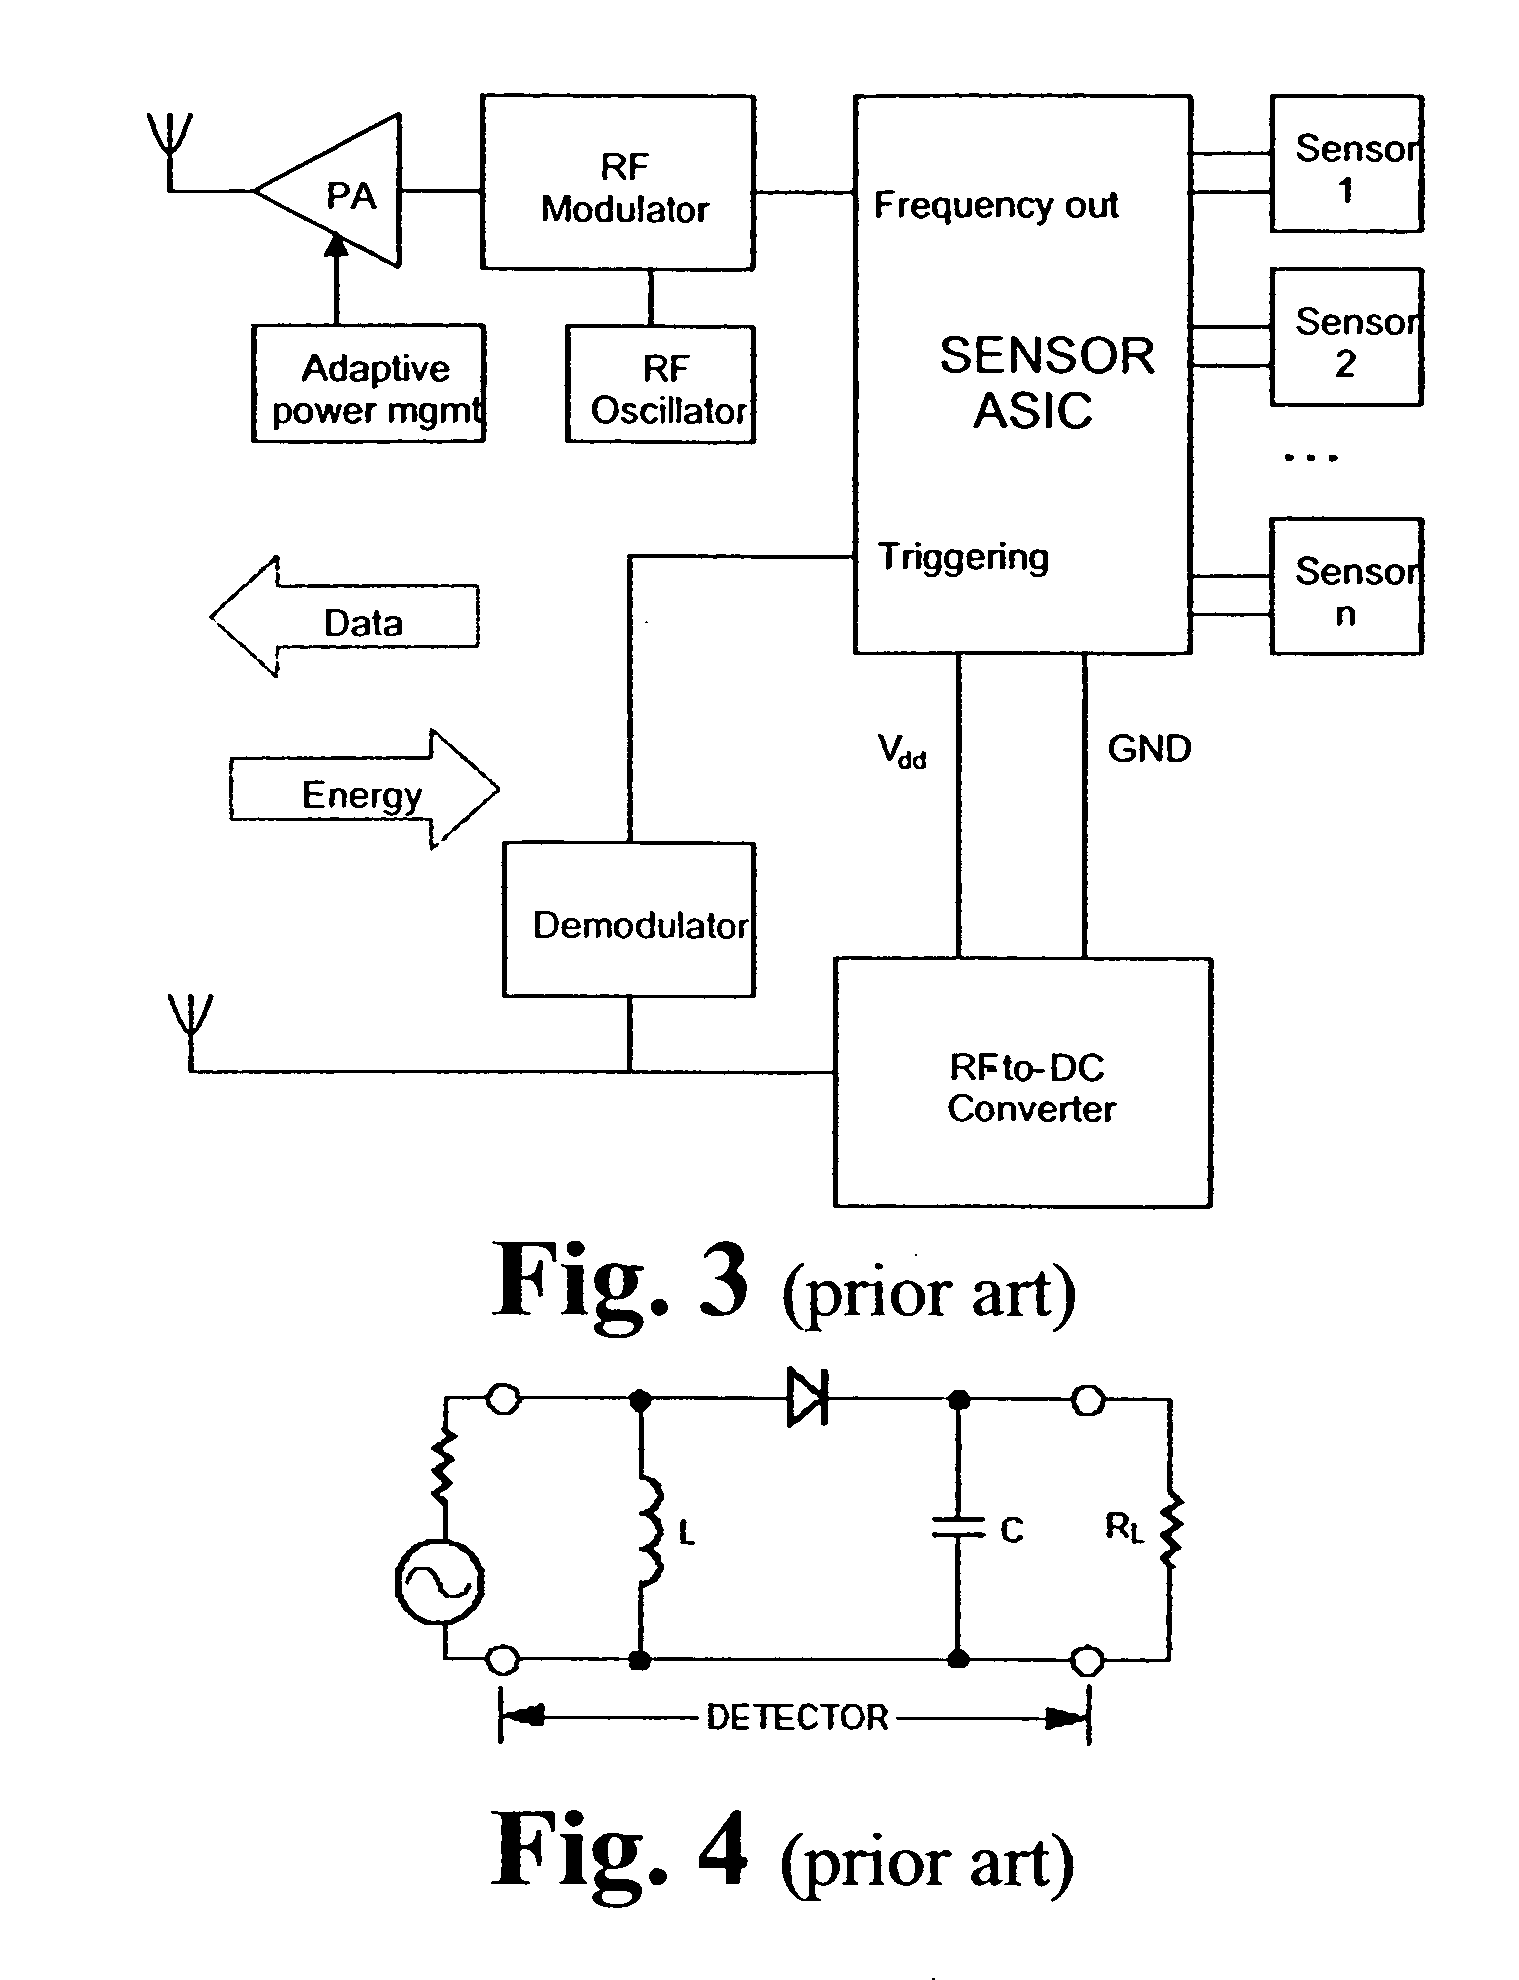 Method and device for transponder aided wake-up of a low power radio device